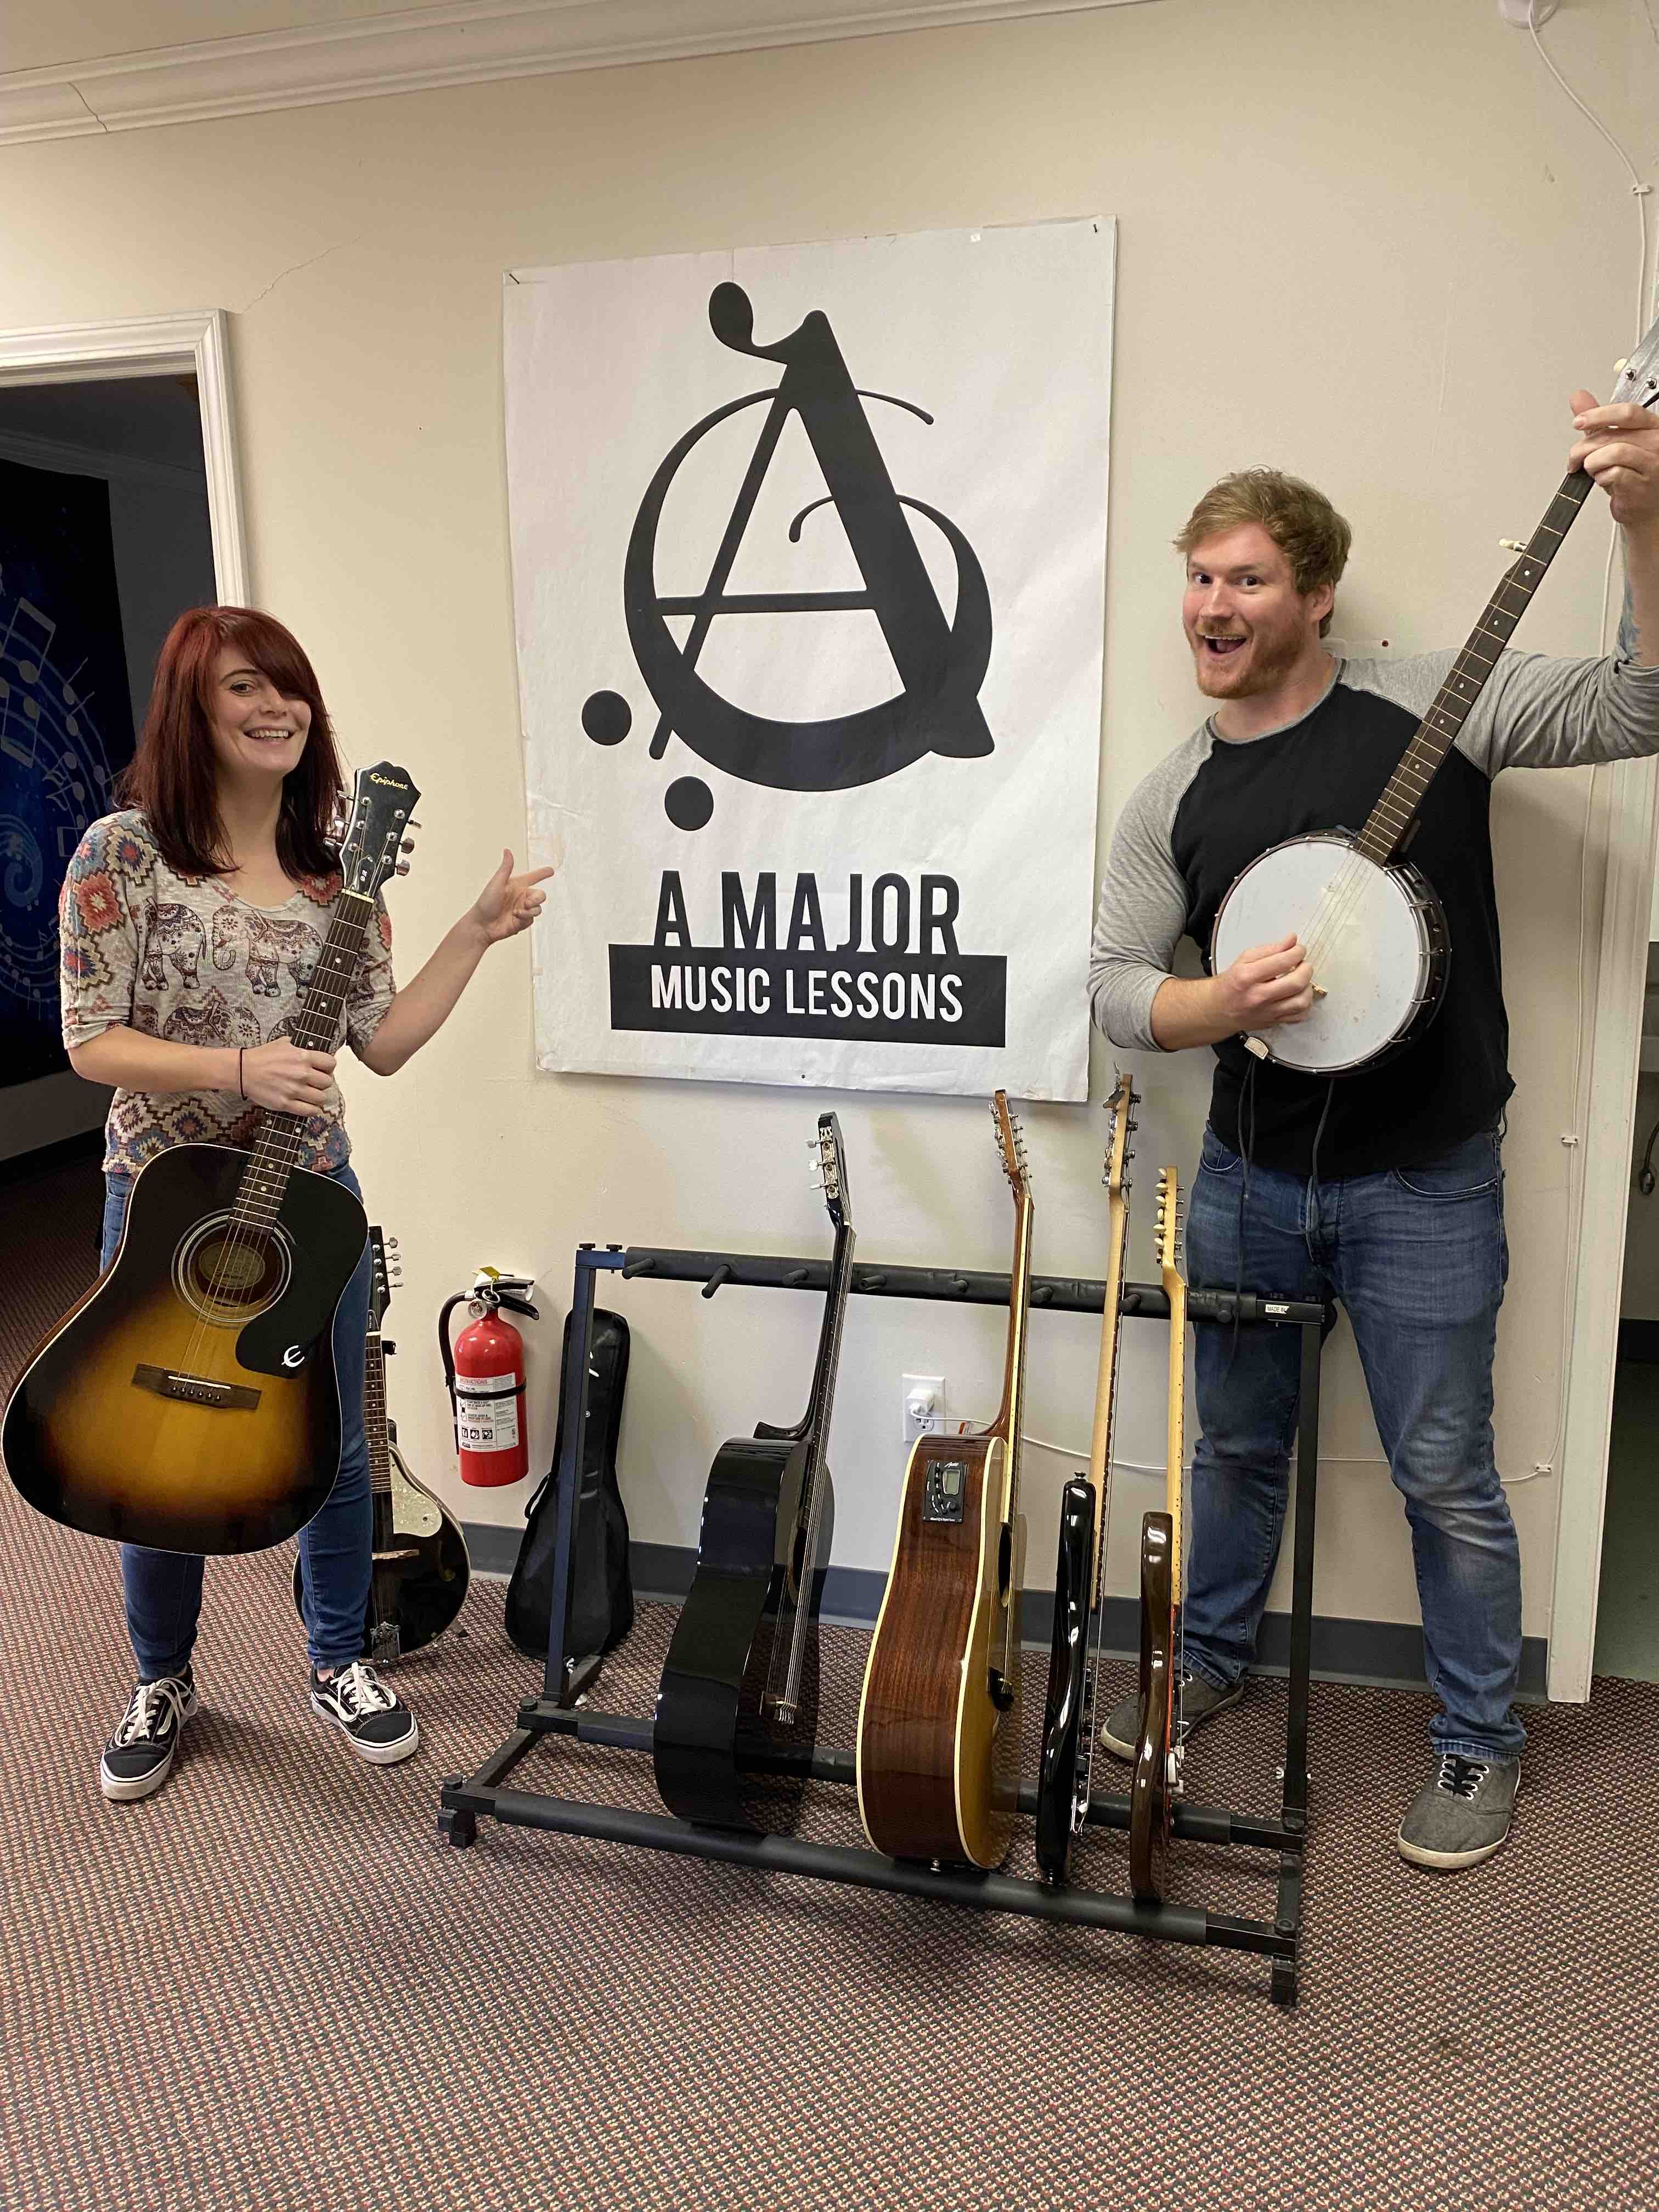 Greg and a student holding various instruments